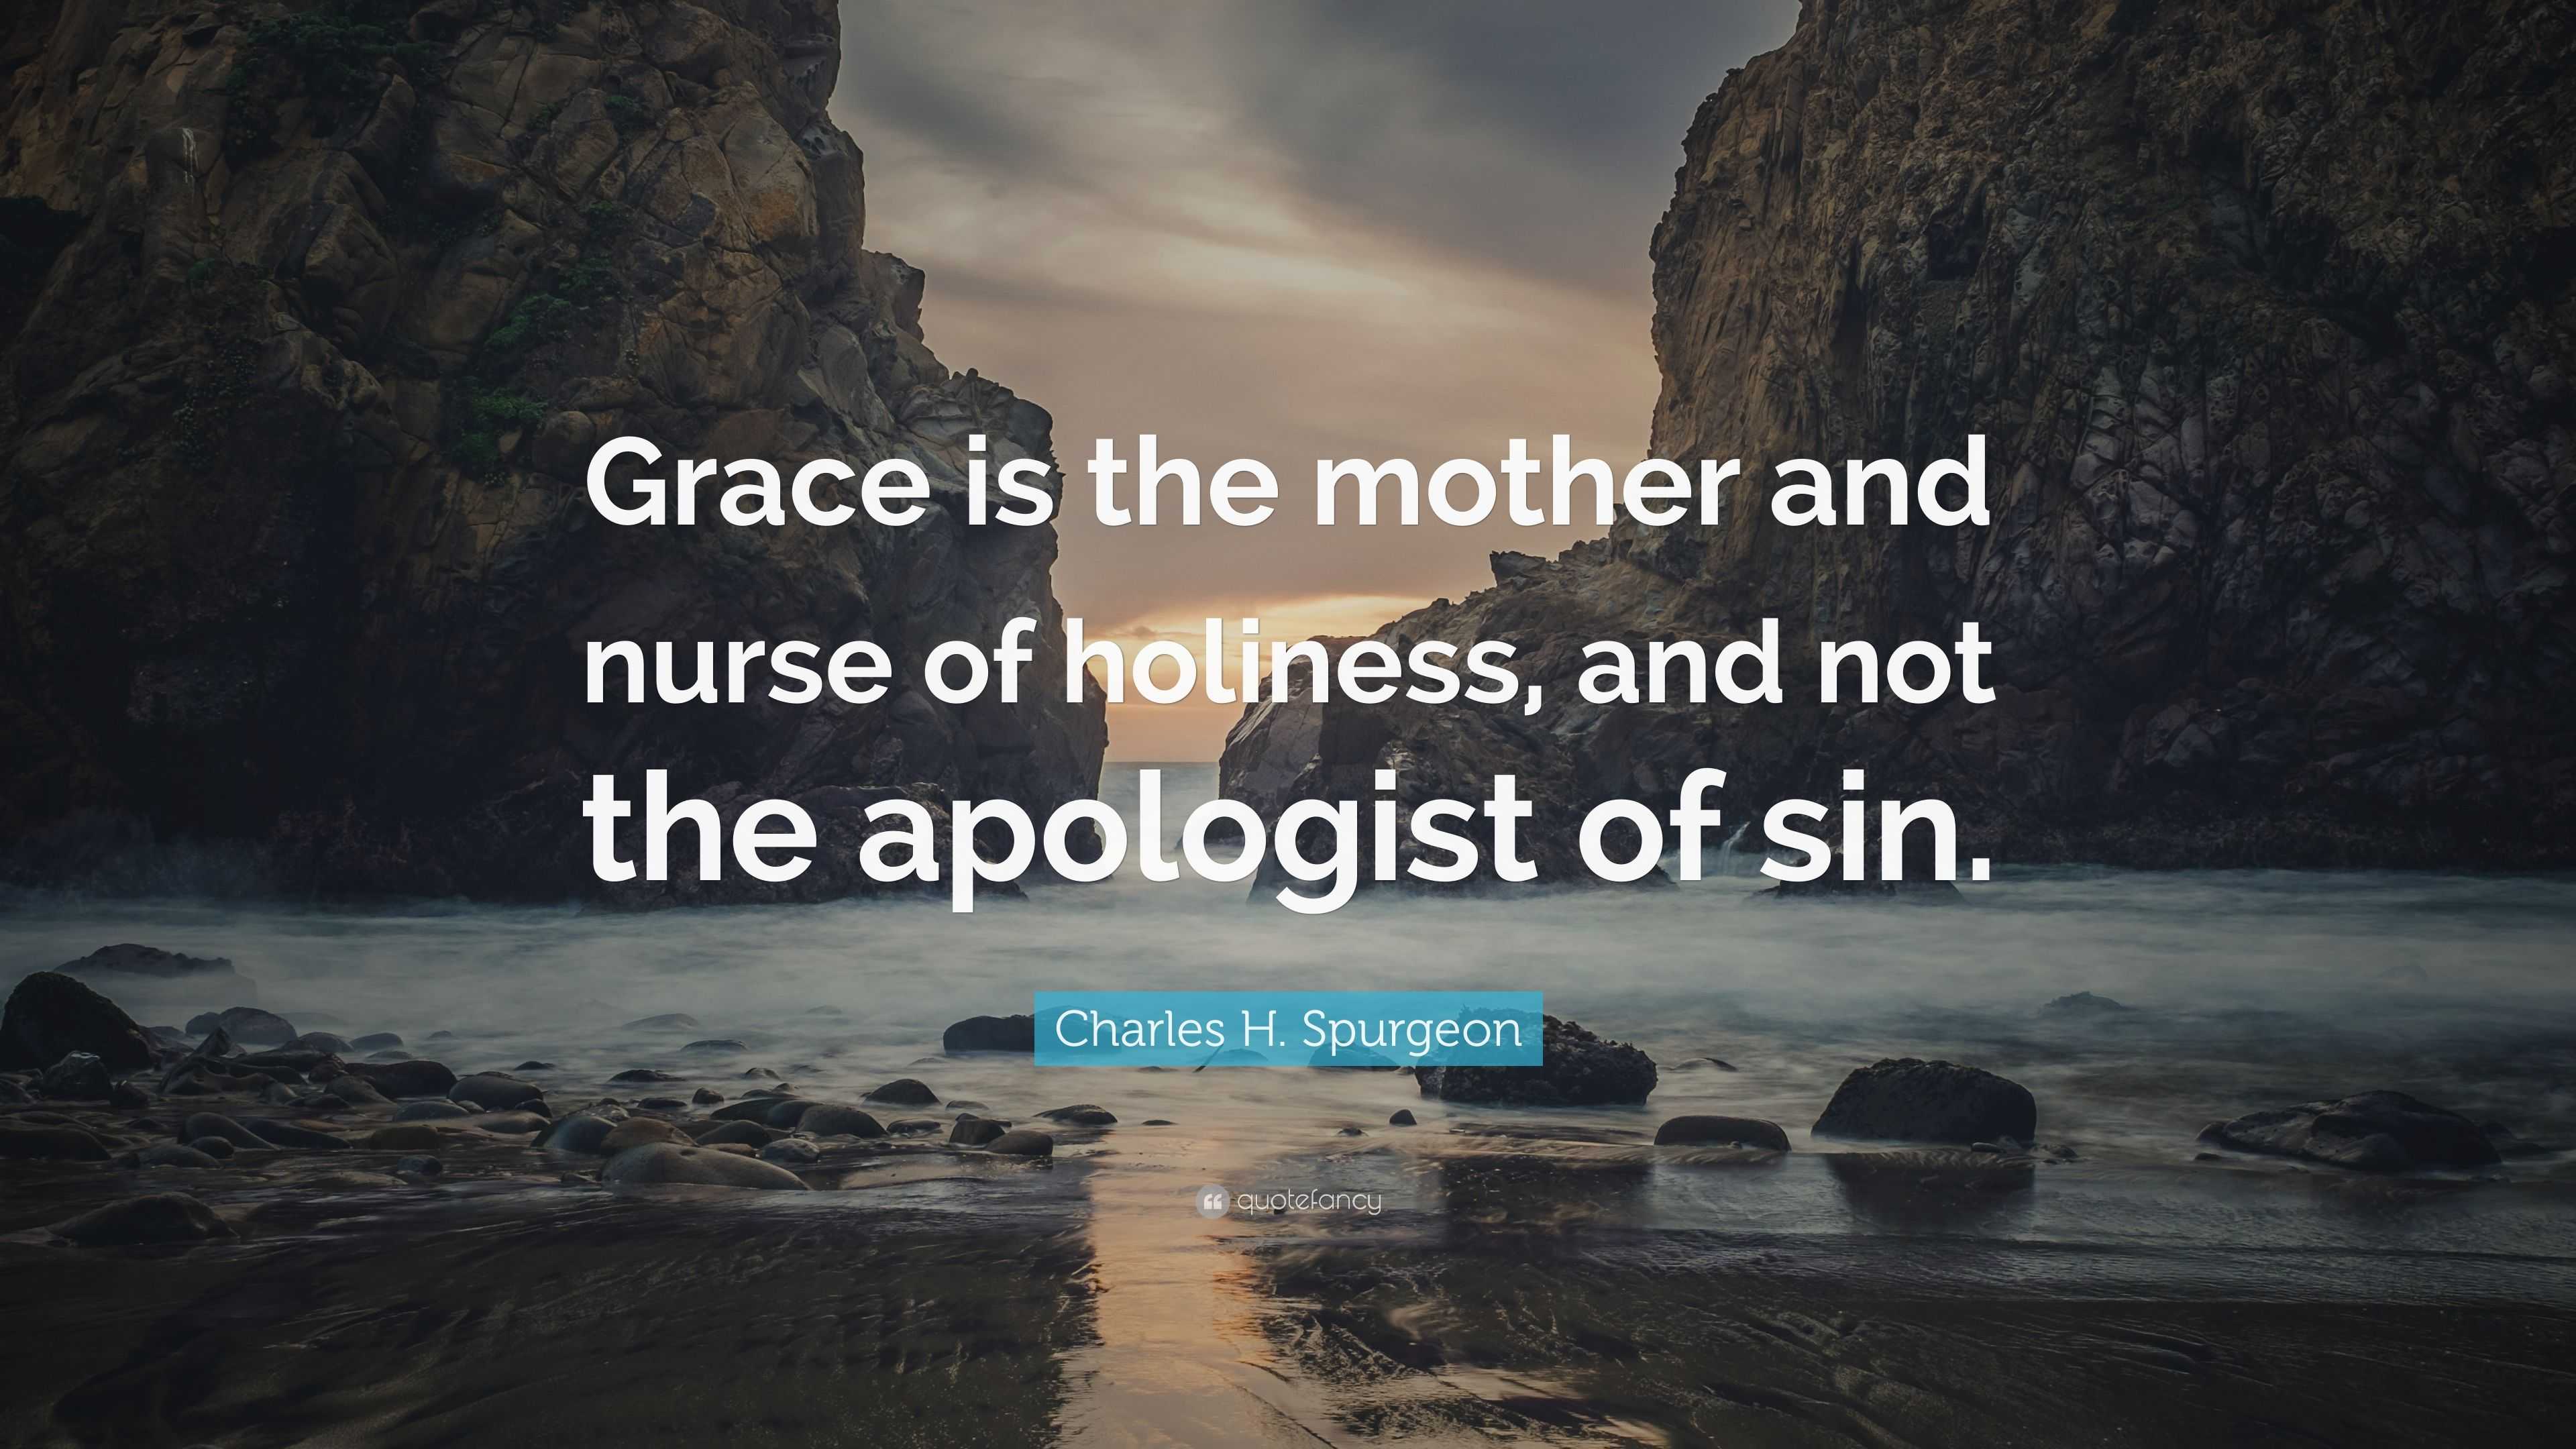 Charles H. Spurgeon Quote: “Grace is the mother and nurse of holiness ...